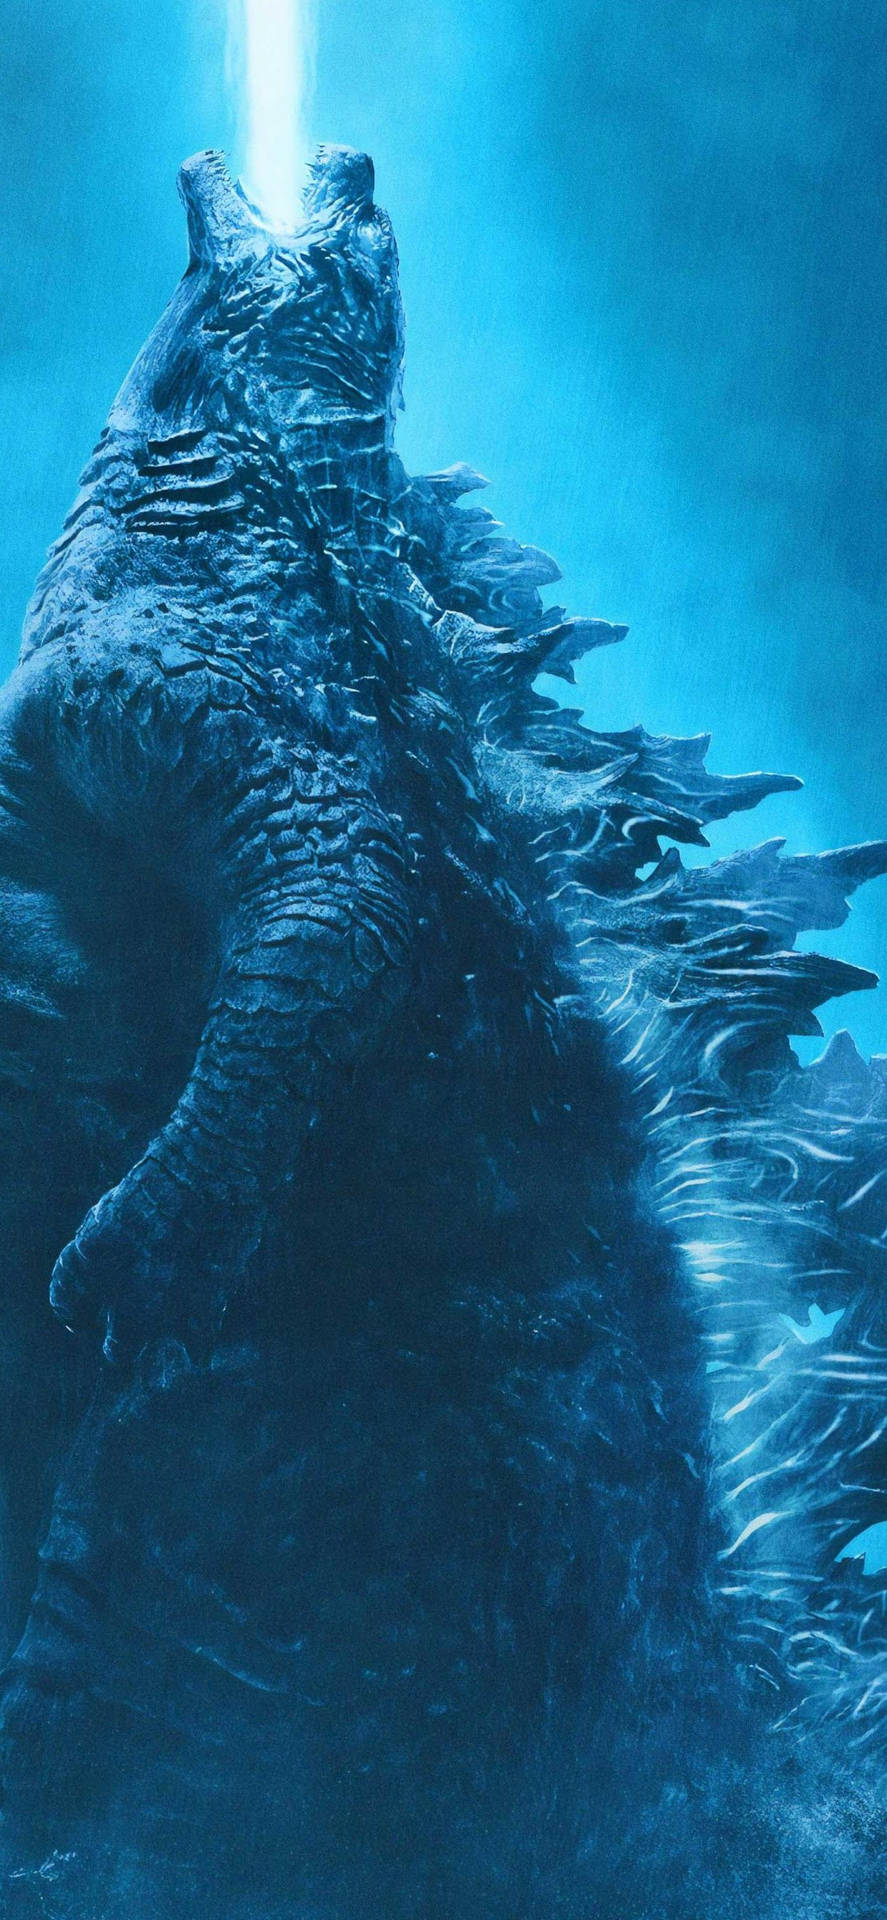 Hd Atomic Breath Of Godzilla King Of The Monsters Background